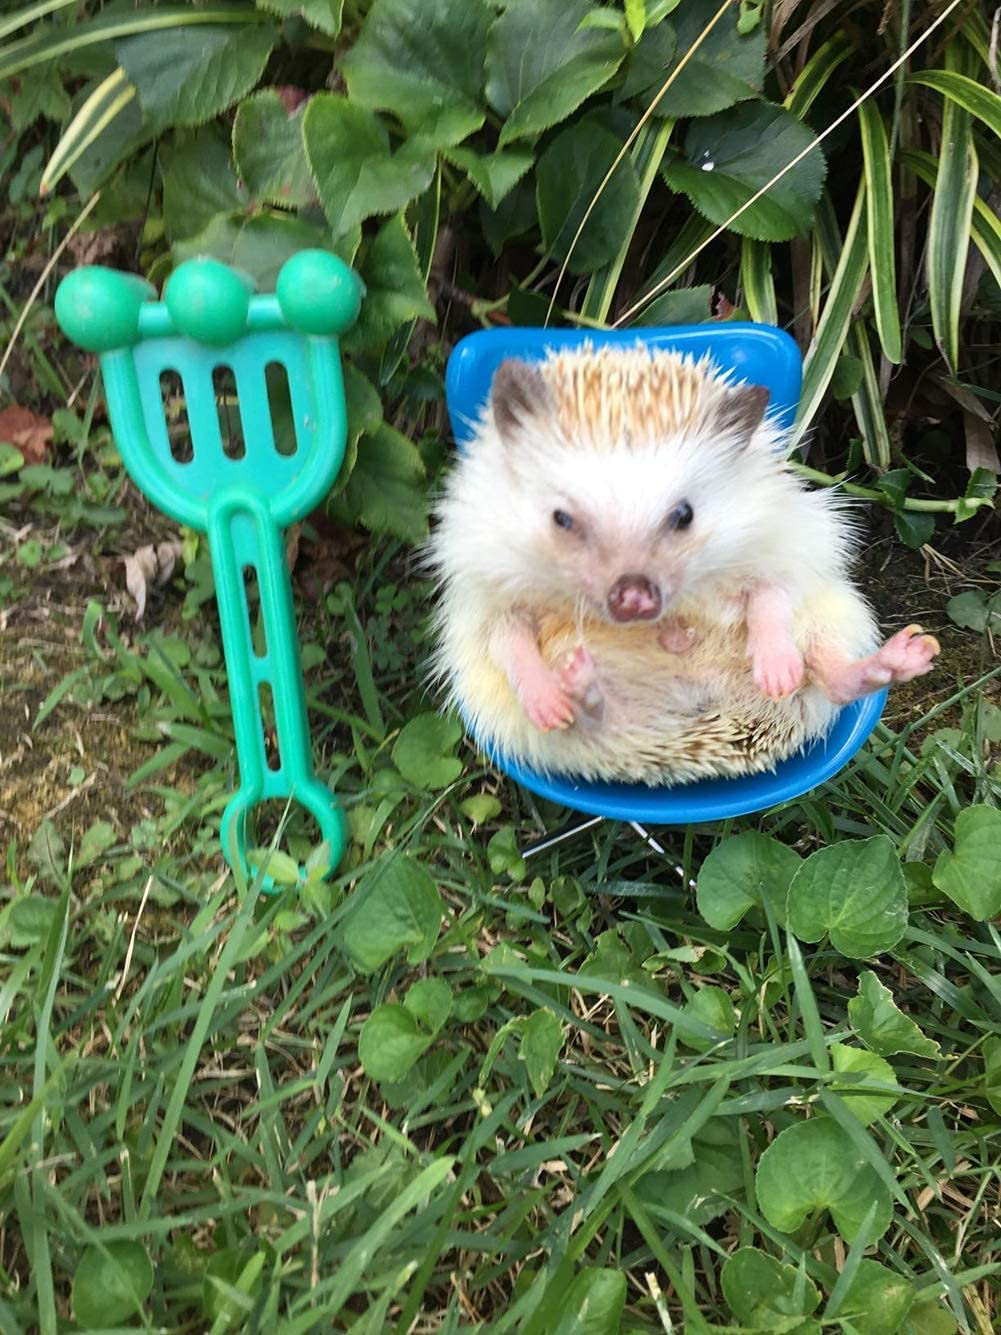 Hedgehog Chair Mini Plastic Swivel Seat Small Animal Toys Habitat Decor Cage Accessories Hedgehog Supplies Photo Props Chair Toy for Hedgehog,Bird,Parrot,Mouse,Chinchilla, Rat,Gerbil,Dwarf Hamster